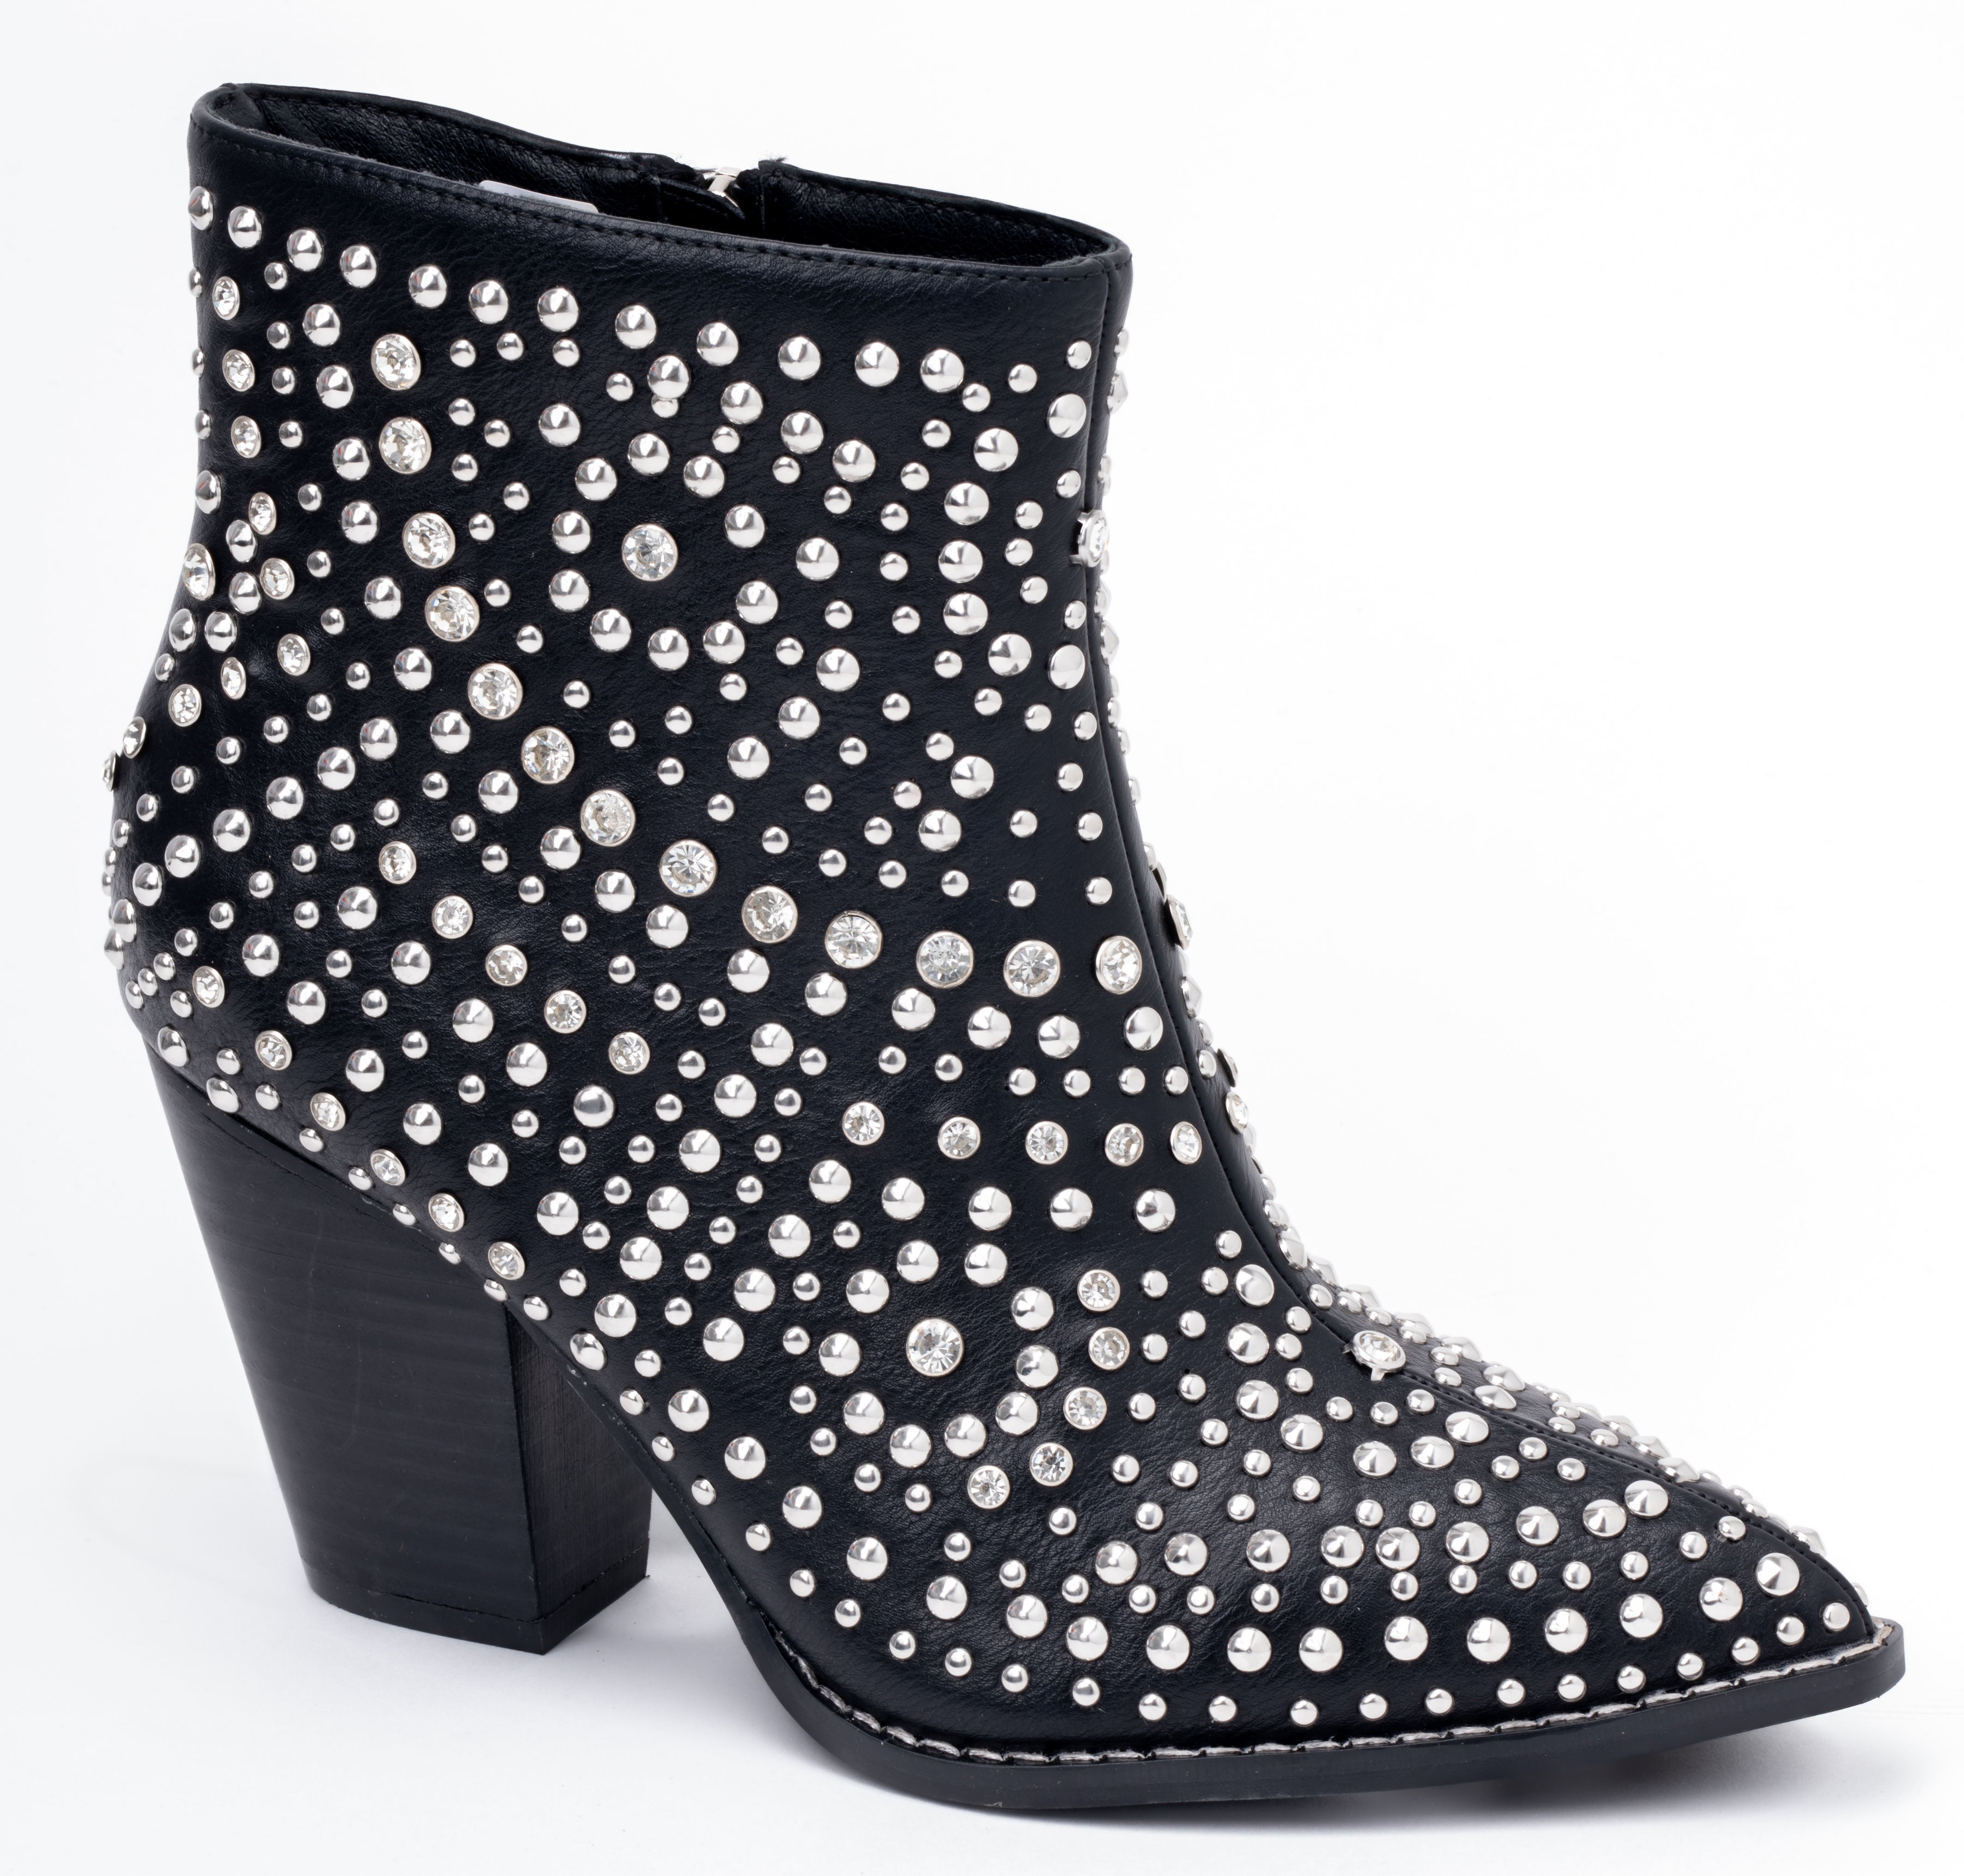 Market Live Preorder: Line Dance Boot by Corky’s (Ships in 2-3 Weeks)